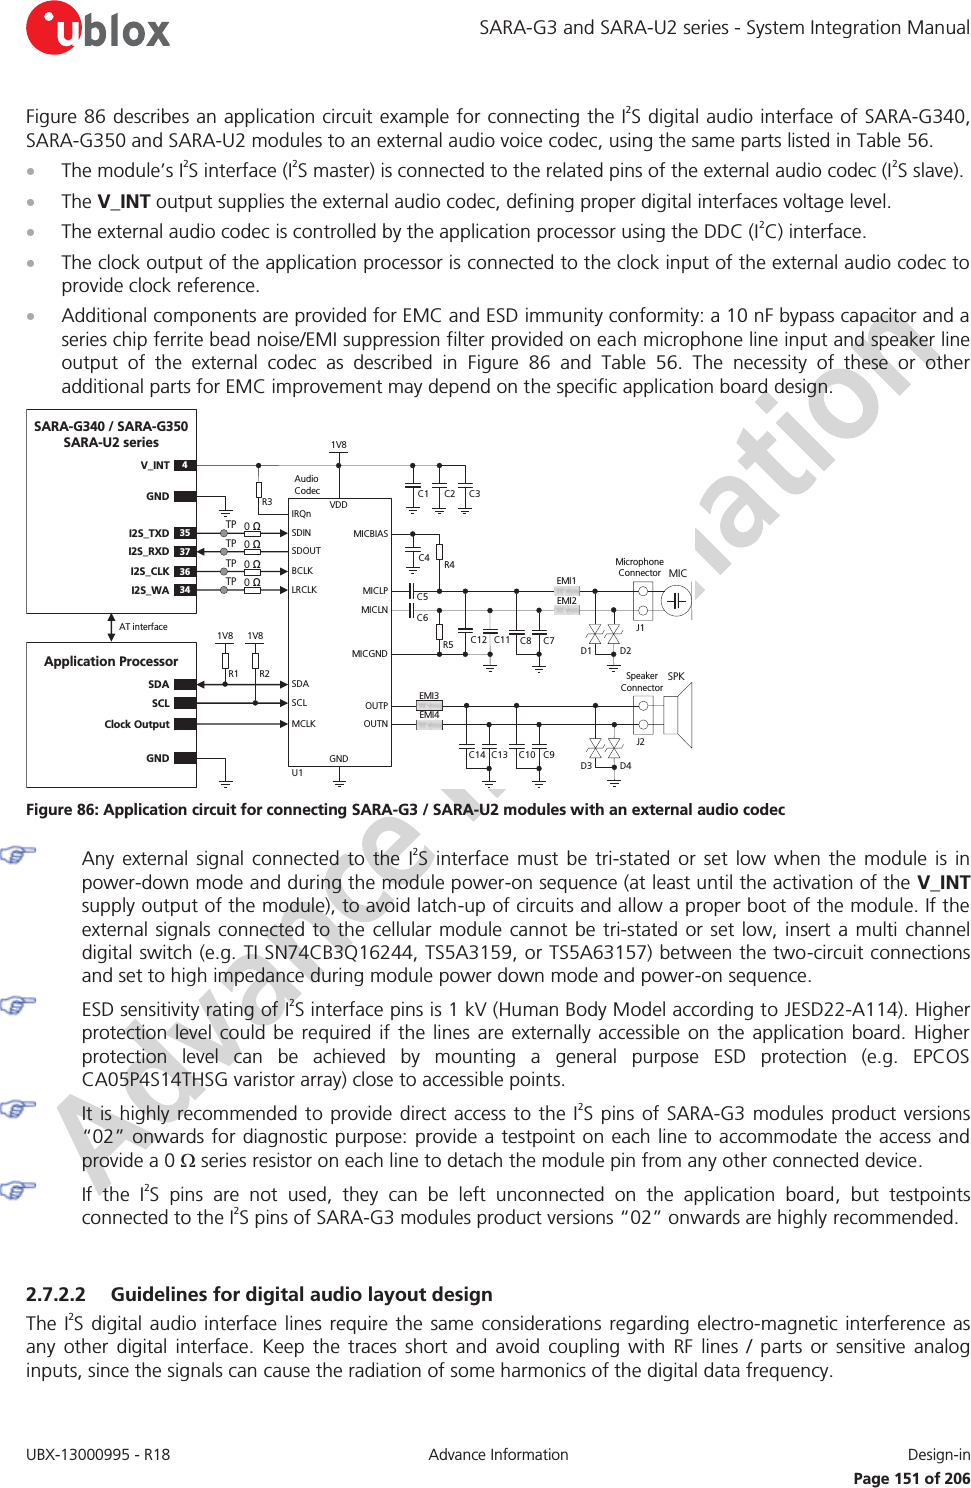 SARA-G3 and SARA-U2 series - System Integration Manual UBX-13000995 - R18  Advance Information  Design-in   Page 151 of 206 Figure 86 describes an application circuit example for connecting the I2S digital audio interface of SARA-G340, SARA-G350 and SARA-U2 modules to an external audio voice codec, using the same parts listed in Table 56. x The module’s I2S interface (I2S master) is connected to the related pins of the external audio codec (I2S slave). x The V_INT output supplies the external audio codec, defining proper digital interfaces voltage level. x The external audio codec is controlled by the application processor using the DDC (I2C) interface. x The clock output of the application processor is connected to the clock input of the external audio codec to provide clock reference. x Additional components are provided for EMC and ESD immunity conformity: a 10 nF bypass capacitor and a series chip ferrite bead noise/EMI suppression filter provided on each microphone line input and speaker line output of the external codec as described in Figure 86 and Table 56. The necessity of these or other additional parts for EMC improvement may depend on the specific application board design. R2R1GNDU1SARA-G340 / SARA-G350 SARA-U2 seriesAudio   CodecSDASCLSDASCLClock Output MCLKGNDR3 C3C2C14V_INTVDD1V8MICBIASC4R4C5C6EMI1MICLNMICLPMicrophone ConnectorEMI2MICC12 C11J1MICGNDR5 C8 C7SPKSpeaker ConnectorOUTPOUTNJ2C10 C9C14 C13EMI3EMI4IRQnBCLKLRCLKSDINSDOUT36I2S_CLK34I2S_WA35I2S_TXD37I2S_RXD1V81V8Application ProcessorGNDAT interfaceD3D1D4D20 Ω0 ΩTPTP0 Ω0 ΩTPTP Figure 86: Application circuit for connecting SARA-G3 / SARA-U2 modules with an external audio codec   Any external signal connected to the I2S interface must be tri-stated or set low when the module is in power-down mode and during the module power-on sequence (at least until the activation of the V_INT supply output of the module), to avoid latch-up of circuits and allow a proper boot of the module. If the external signals connected to the cellular module cannot be tri-stated or set low, insert a multi channel digital switch (e.g. TI SN74CB3Q16244, TS5A3159, or TS5A63157) between the two-circuit connections and set to high impedance during module power down mode and power-on sequence.  ESD sensitivity rating of I2S interface pins is 1 kV (Human Body Model according to JESD22-A114). Higher protection level could be required if the lines are externally accessible on the application board. Higher protection level can be achieved by mounting a general purpose ESD protection (e.g. EPCOS CA05P4S14THSG varistor array) close to accessible points.  It is highly recommended to provide direct access to the I2S pins of SARA-G3 modules product versions “02” onwards for diagnostic purpose: provide a testpoint on each line to accommodate the access and provide a 0 : series resistor on each line to detach the module pin from any other connected device.  If the I2S pins are not used, they can be left unconnected on the application board, but testpoints connected to the I2S pins of SARA-G3 modules product versions “02” onwards are highly recommended.  2.7.2.2 Guidelines for digital audio layout design The I2S digital audio interface lines require the same considerations regarding electro-magnetic interference as any other digital interface. Keep the traces short and avoid coupling with RF lines / parts or sensitive analog inputs, since the signals can cause the radiation of some harmonics of the digital data frequency. 